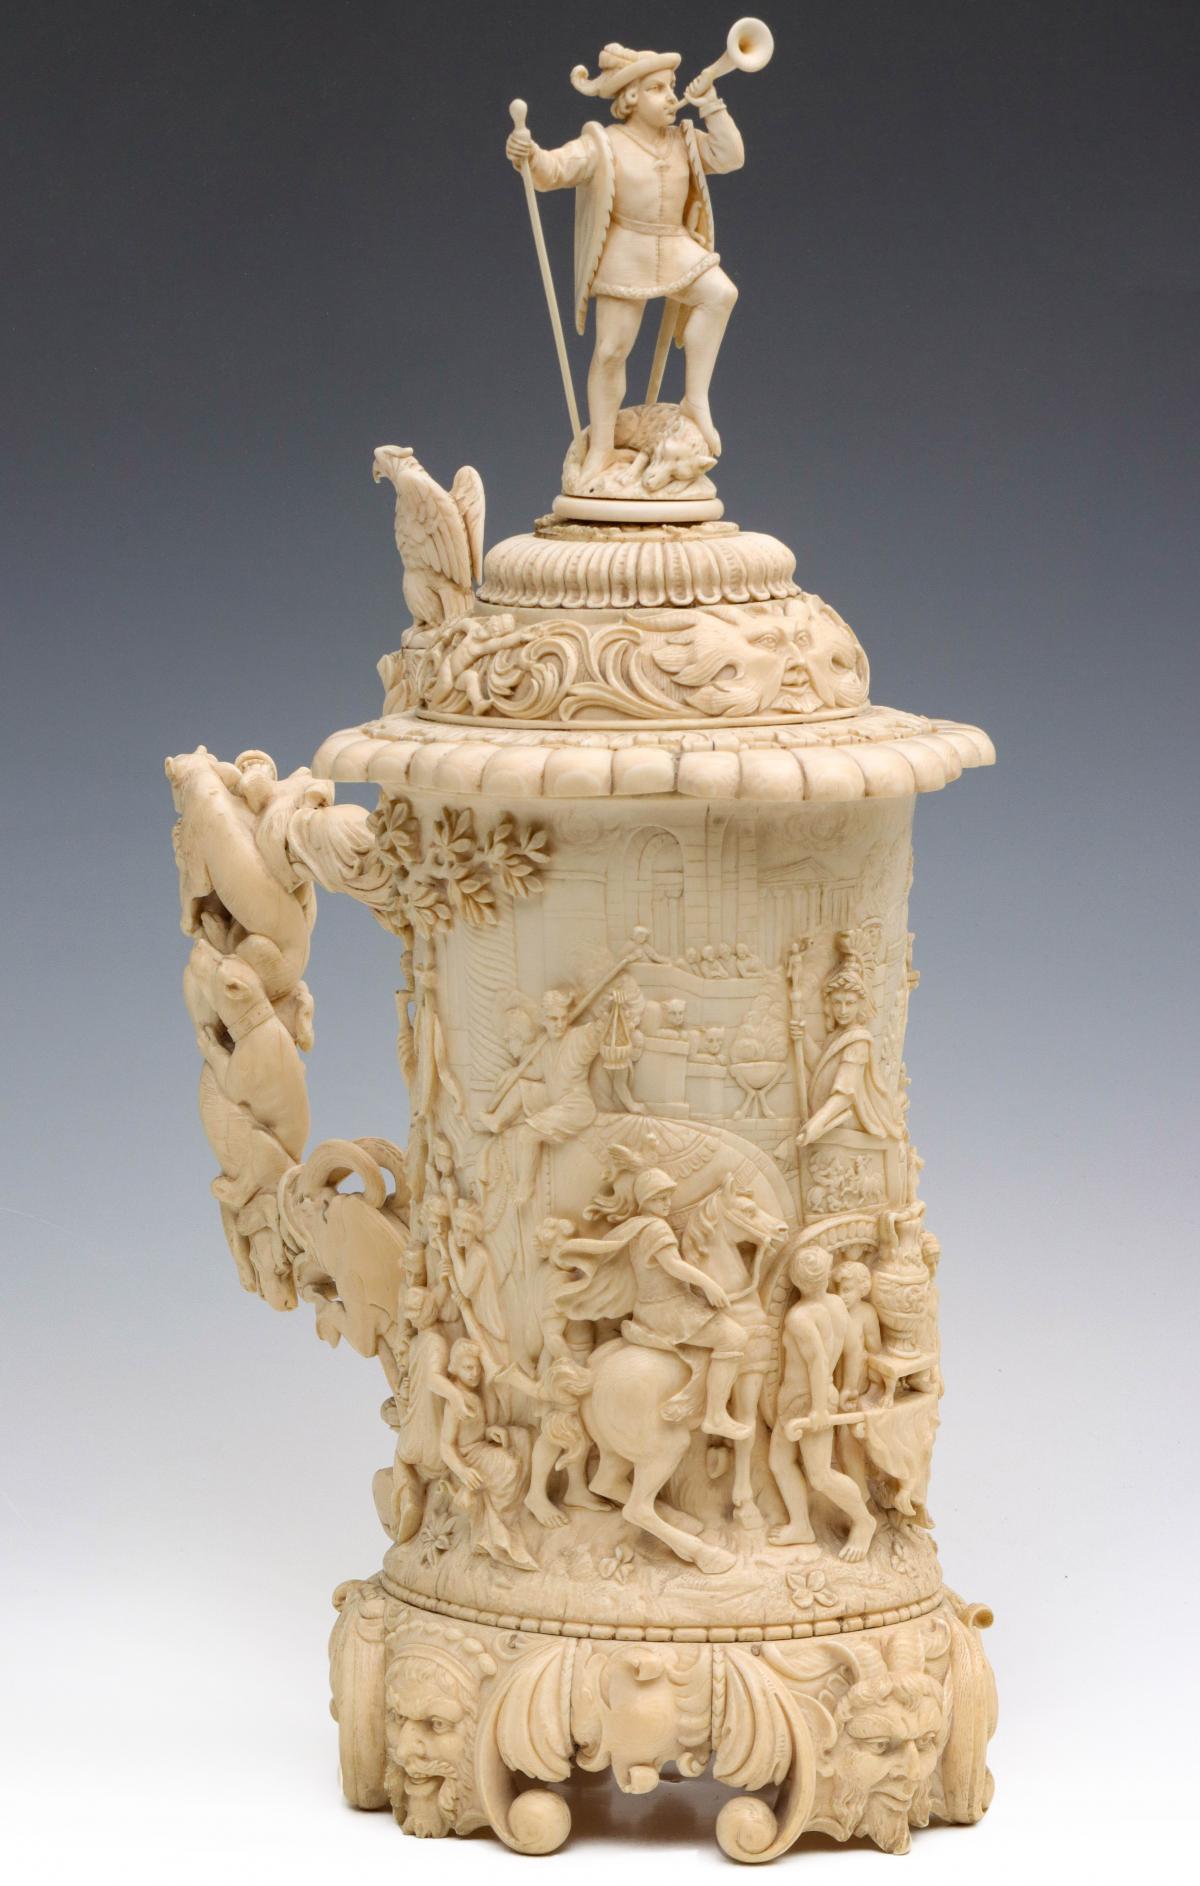 A MASSIVE 19TH C. GERMAN CARVED IVORY STEIN 20 INCHES